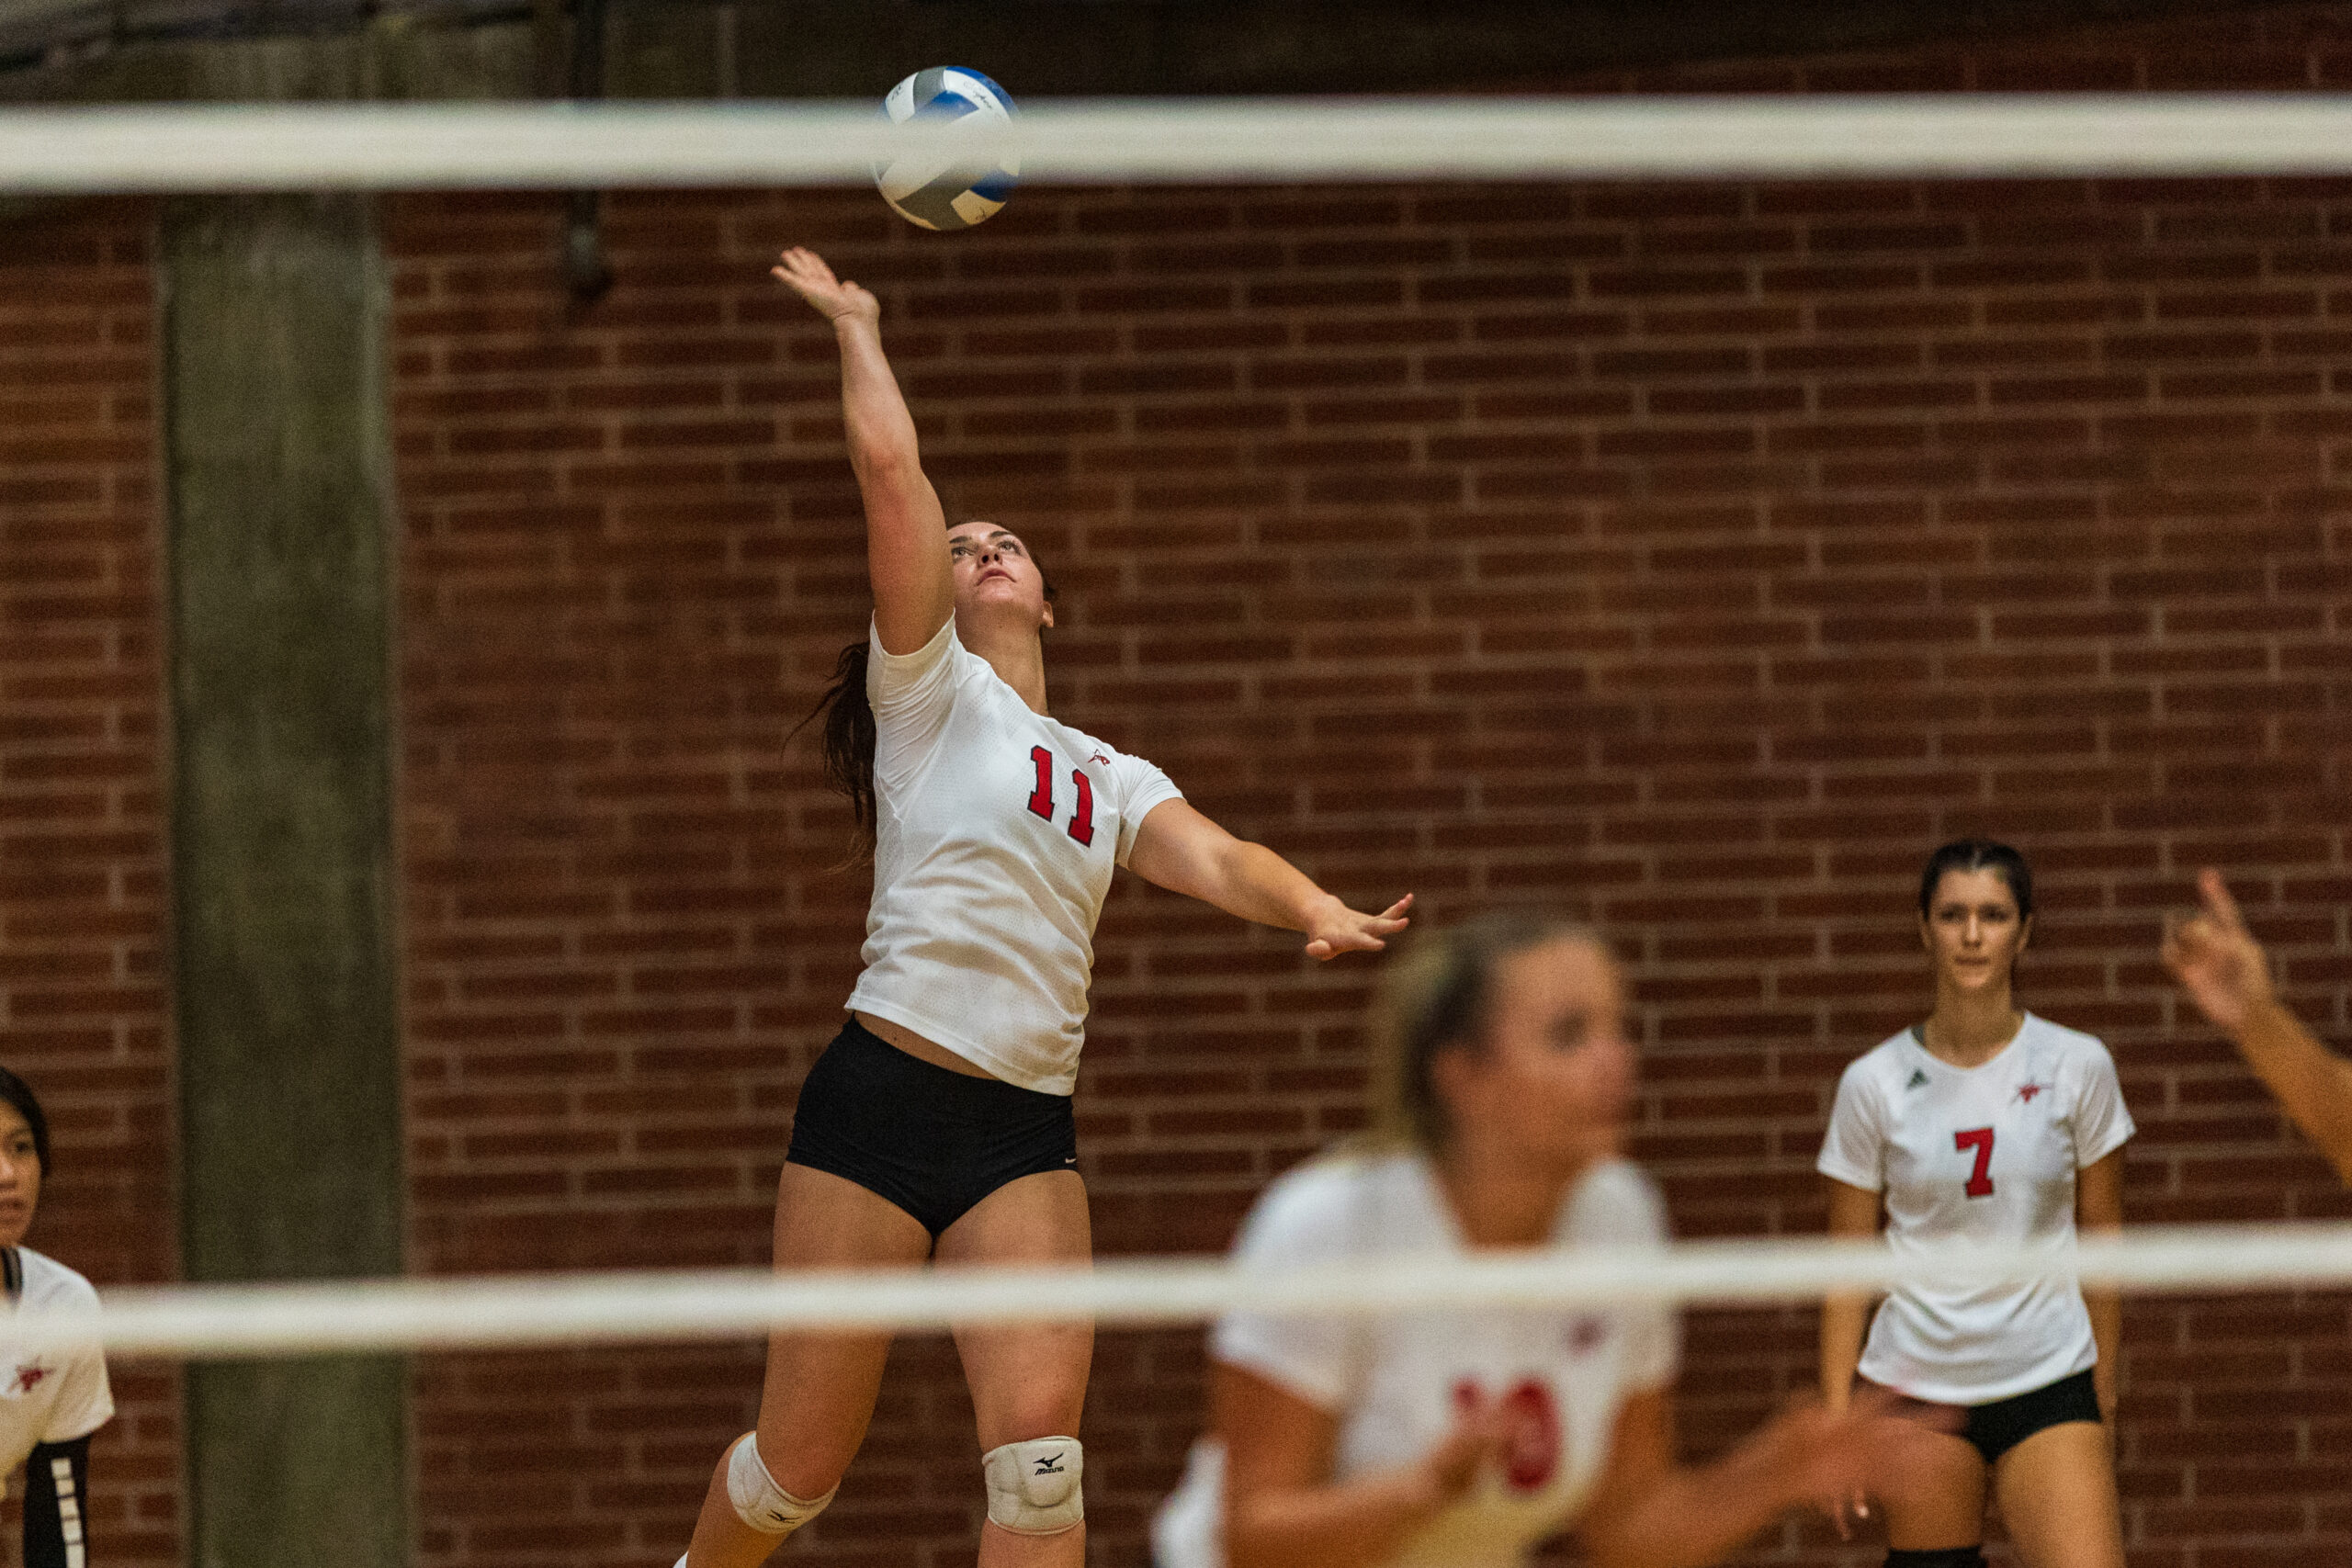 A women's volleyball player hits the ball during a game in September 2021